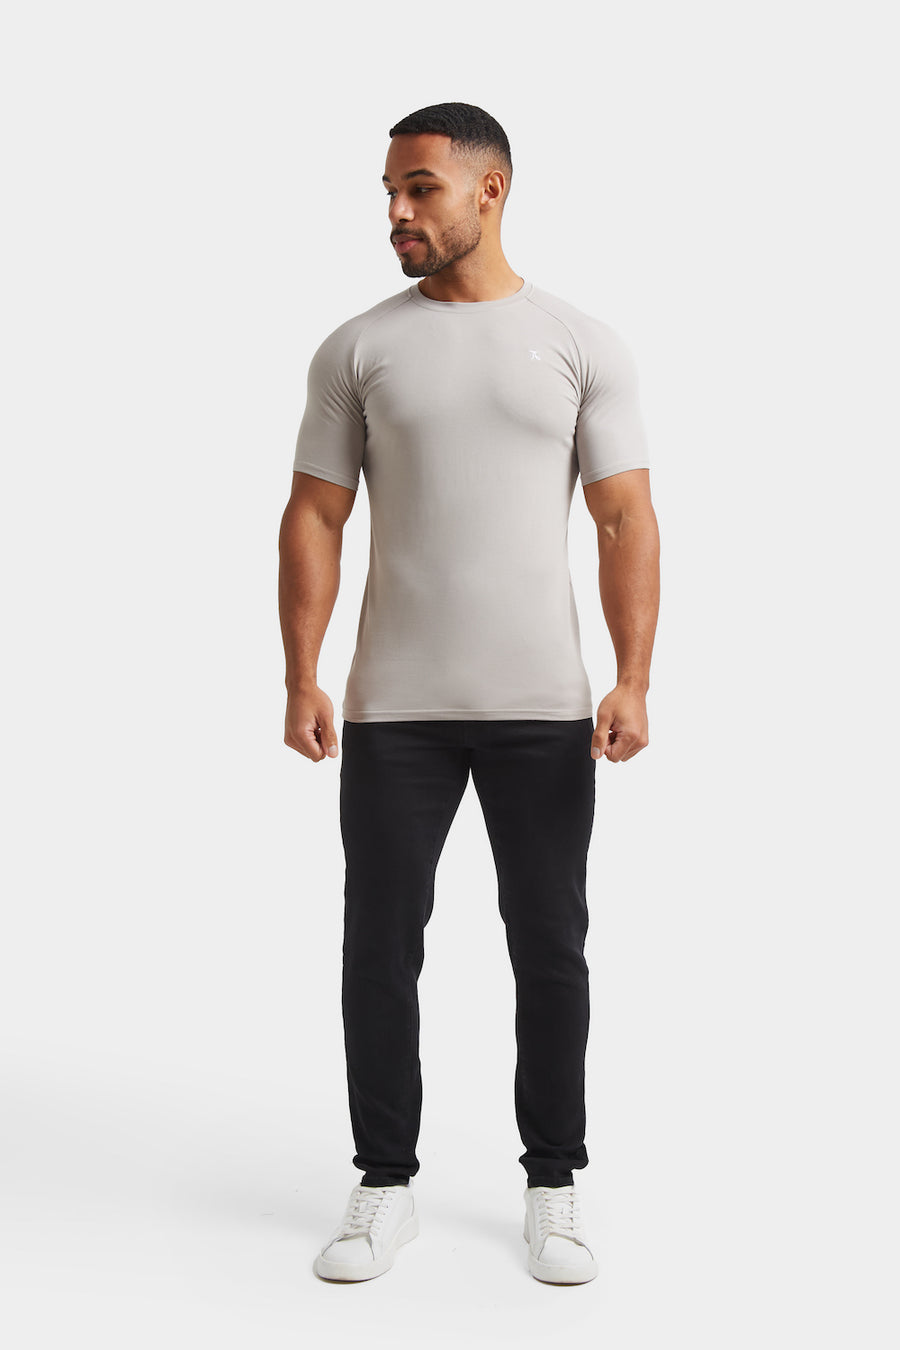 Athletic Fit T-Shirt in Concrete Grey - TAILORED ATHLETE - USA